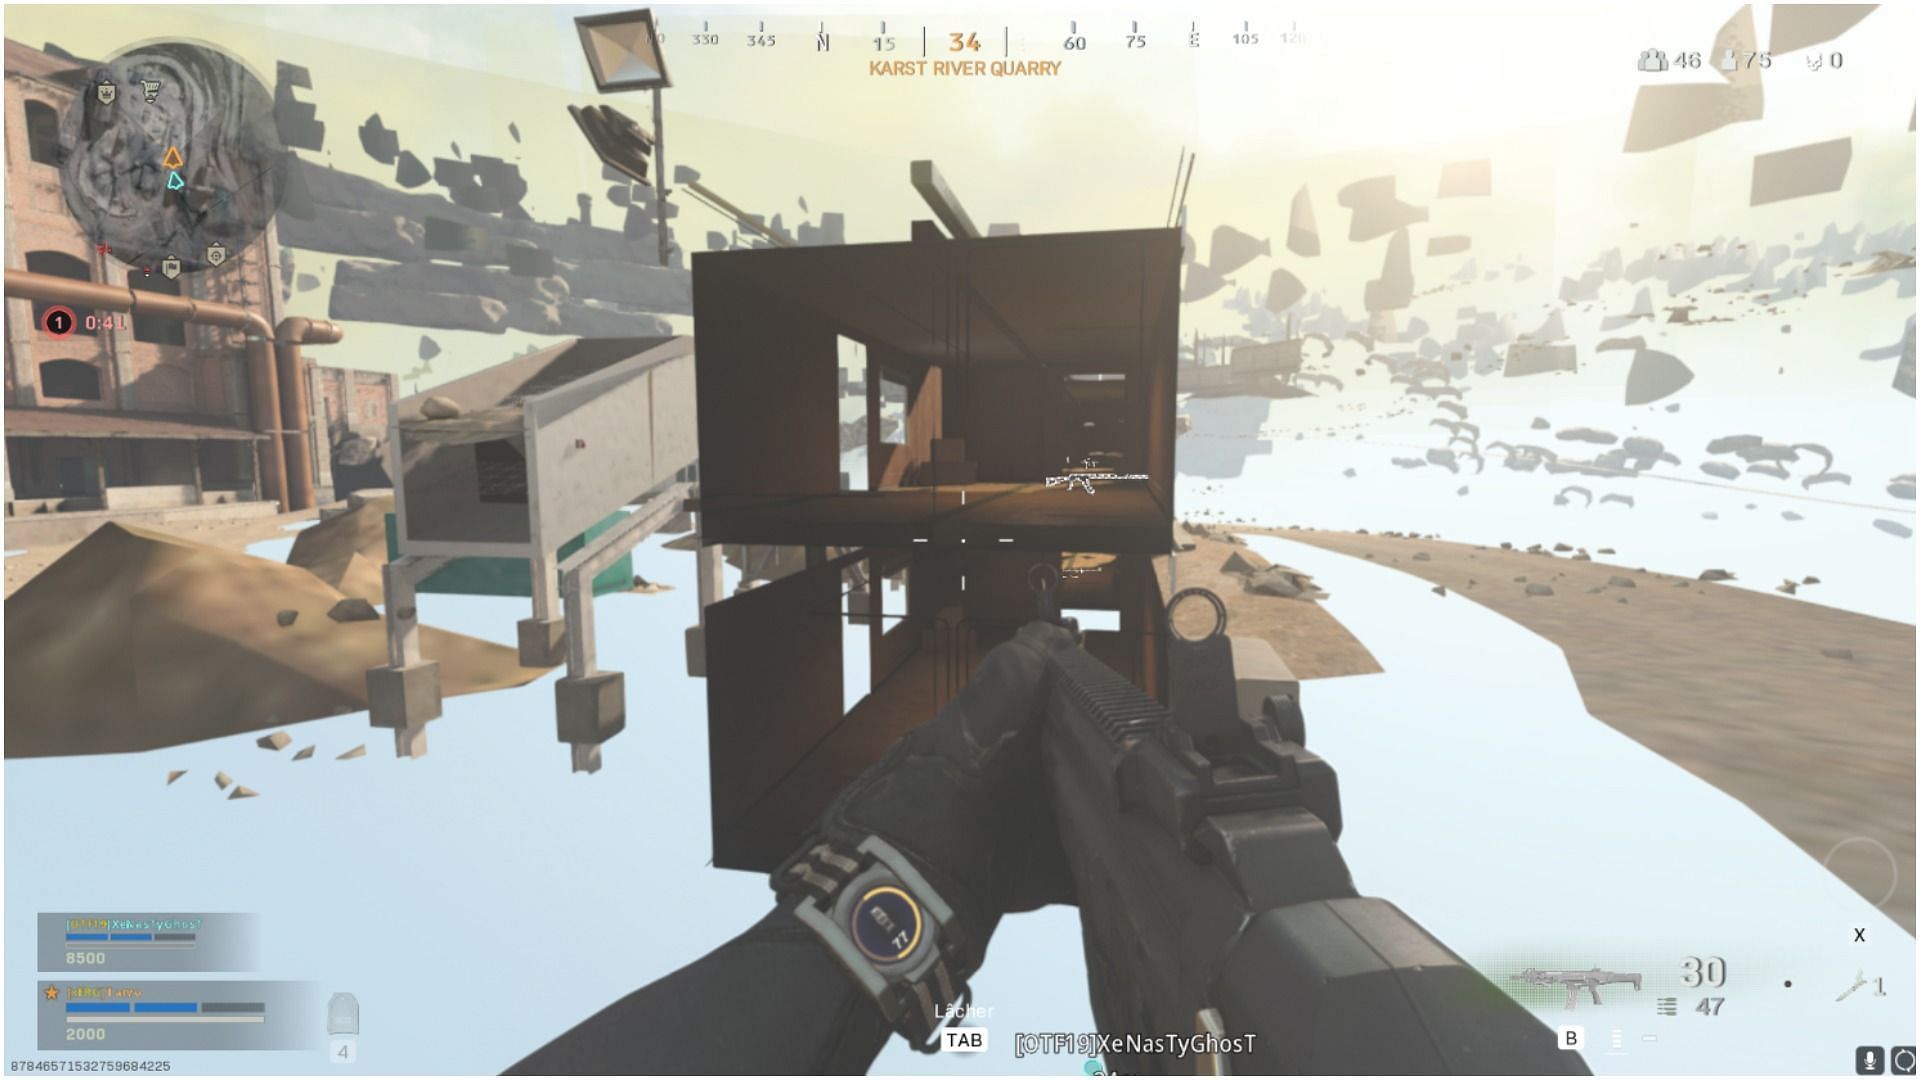 Arsenal POI in Warzone has a potential glitch situation (Image via Reddit/ImTarvo)